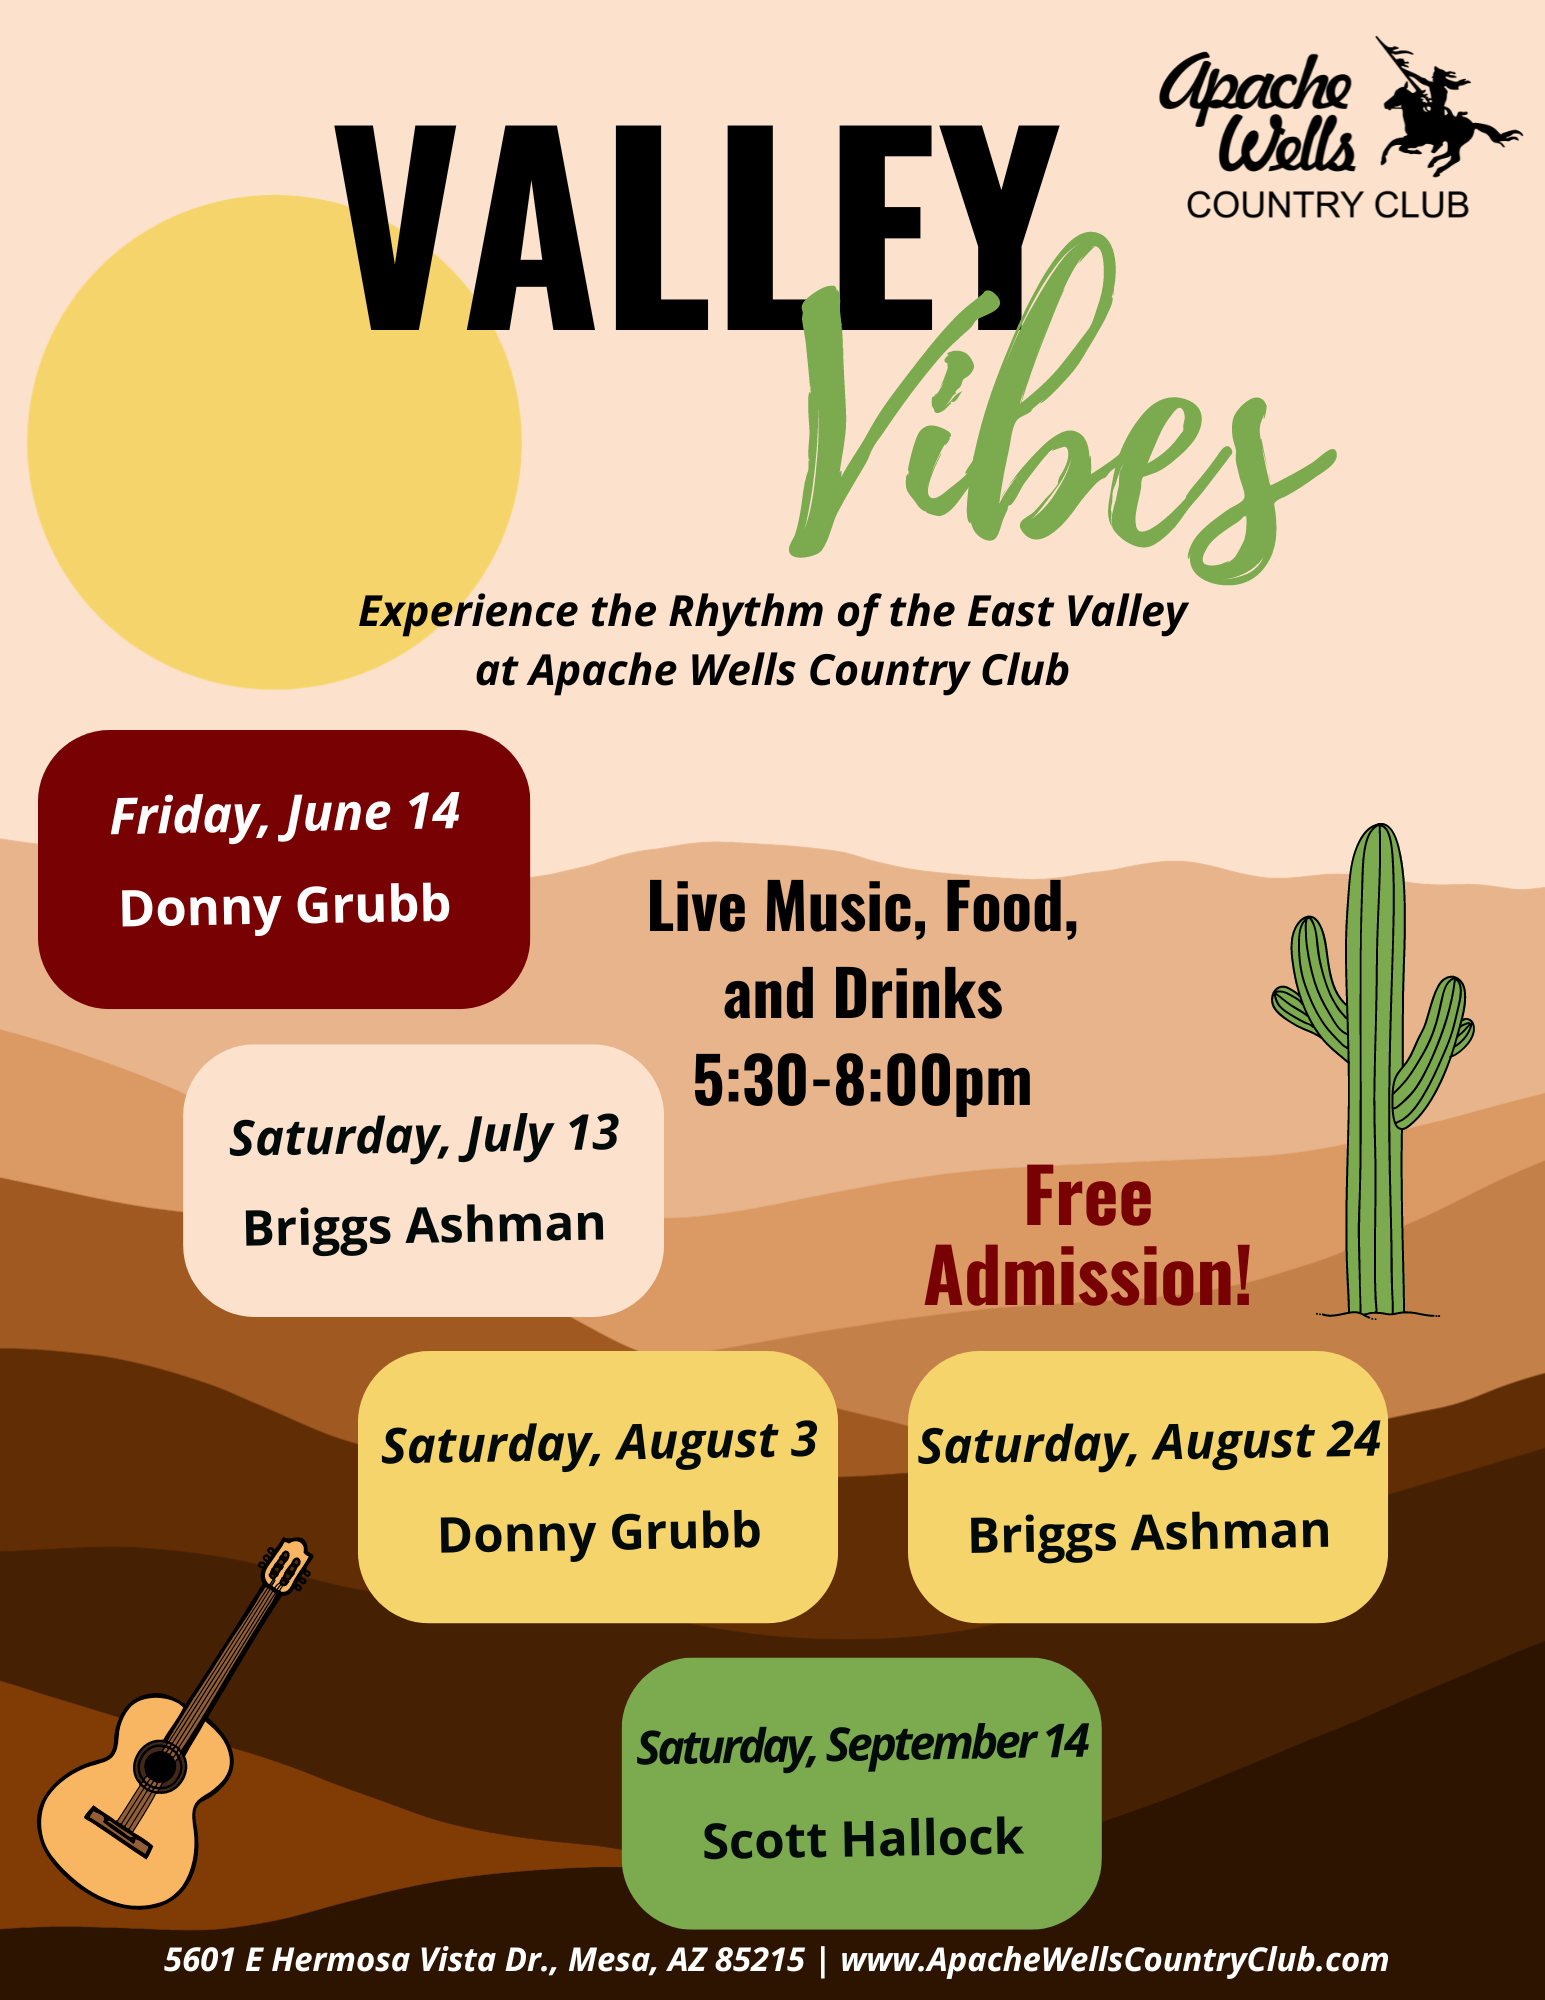 Copy of AWCC Valley Vibes